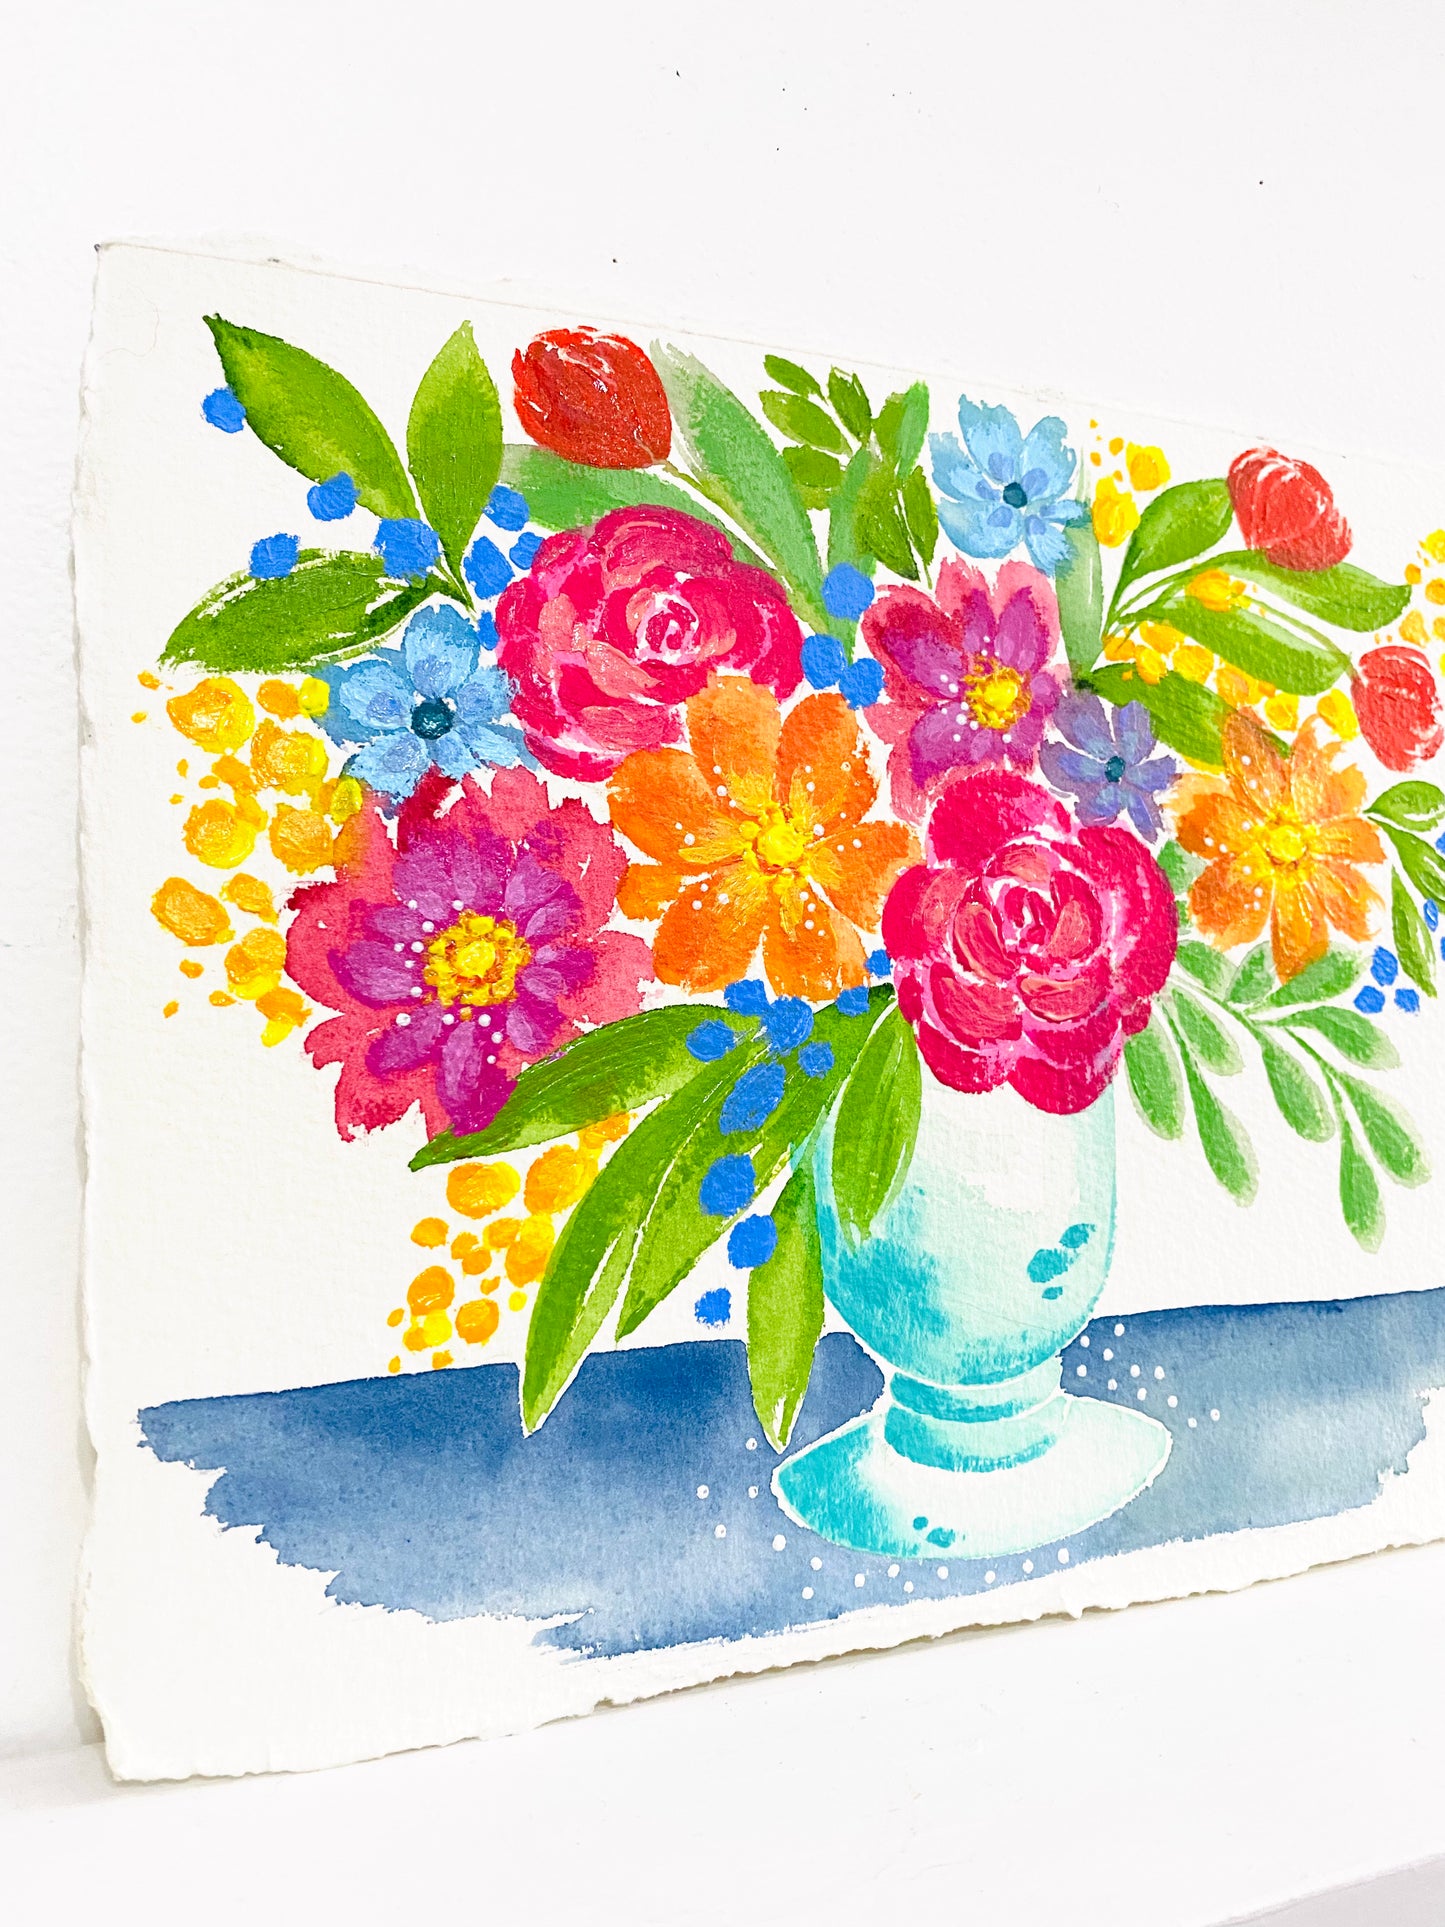 Full Bloom Floral Original Painting on Deckled Edge Watercolor Paper